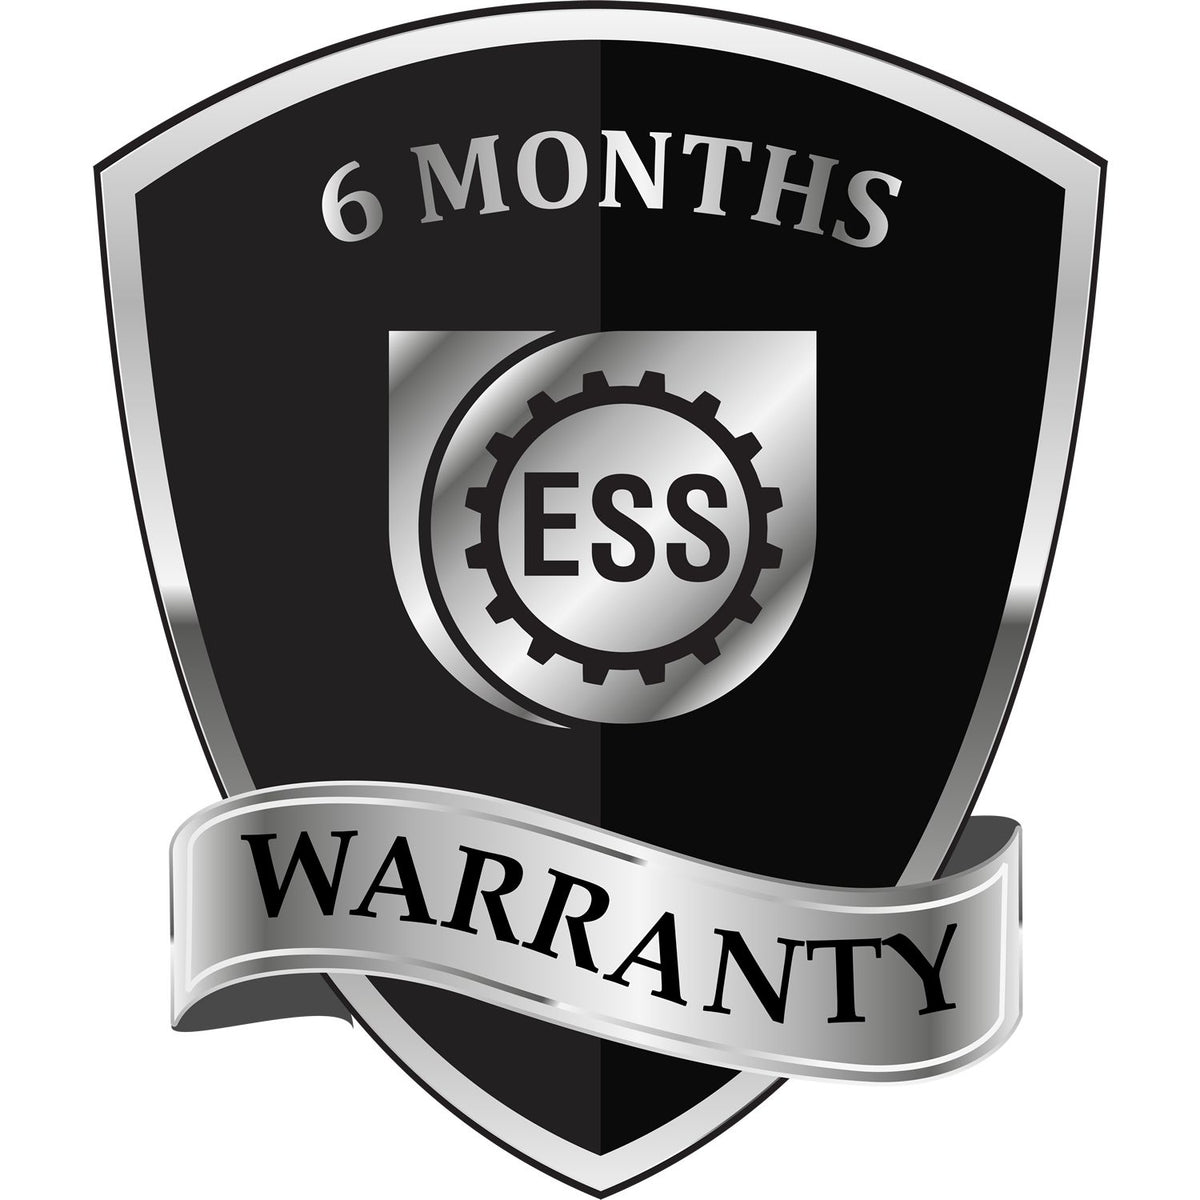 A badge or emblem showing a warranty icon for the Self-Inking Nebraska PE Stamp